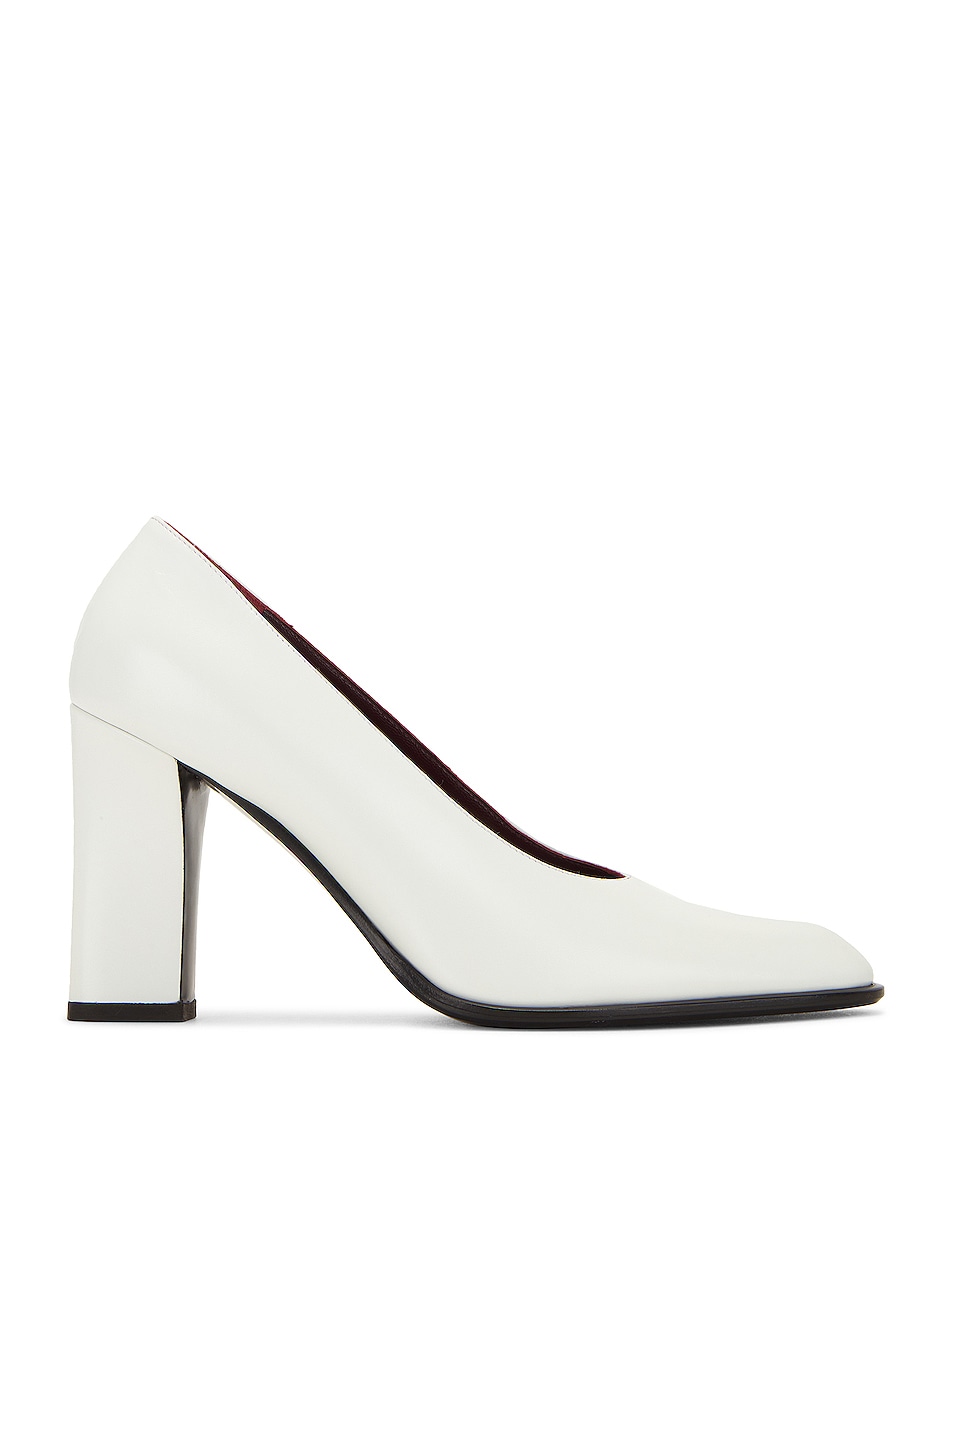 Image 1 of The Row Olivia Pump in White